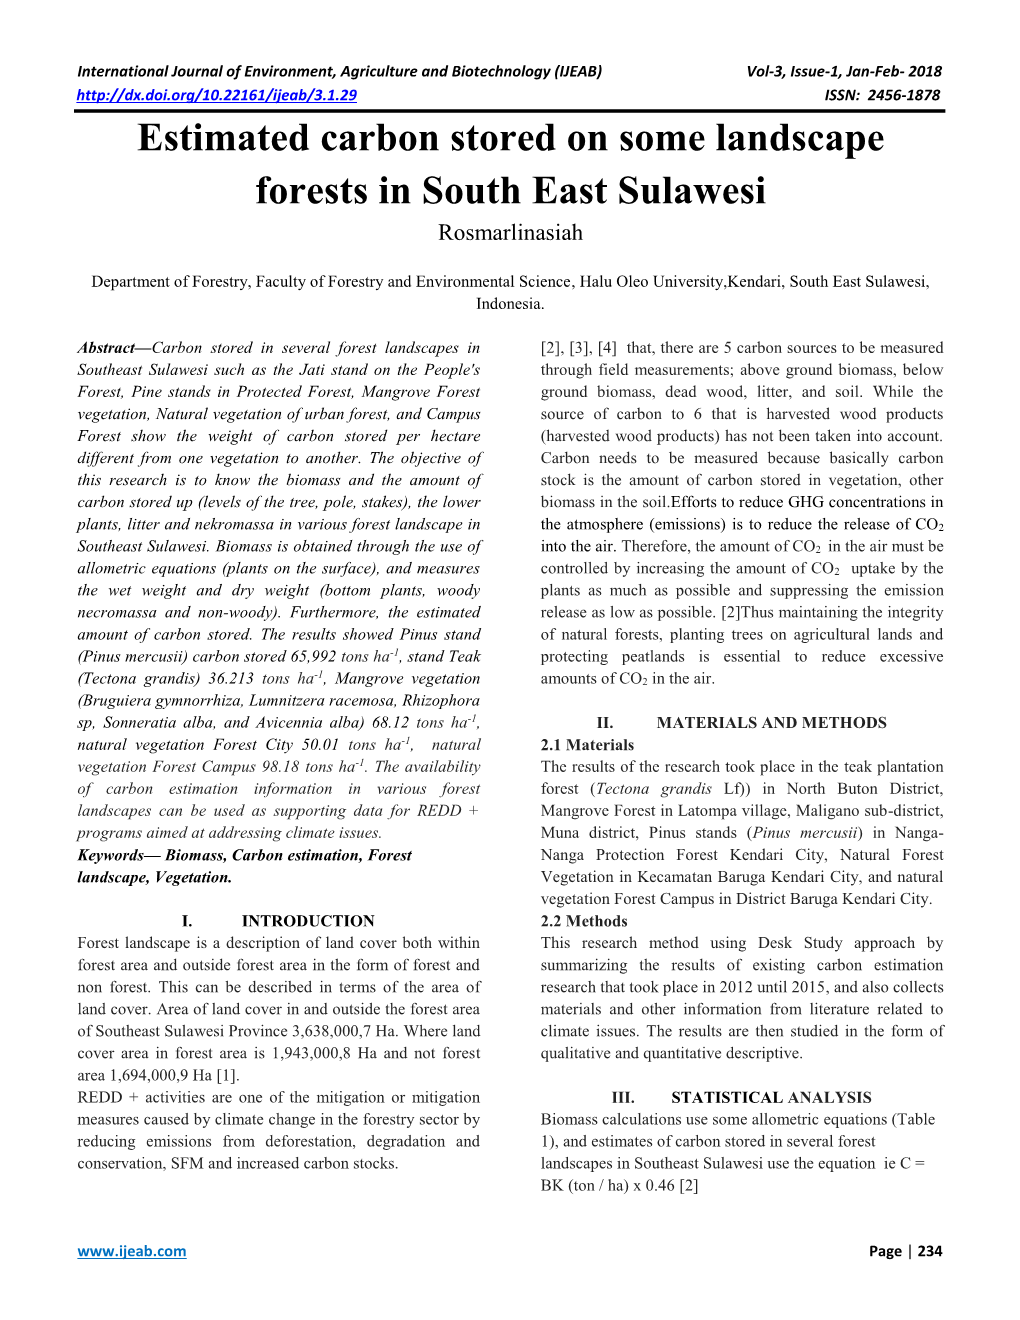 Estimated Carbon Stored on Some Landscape Forests in South East Sulawesi Rosmarlinasiah